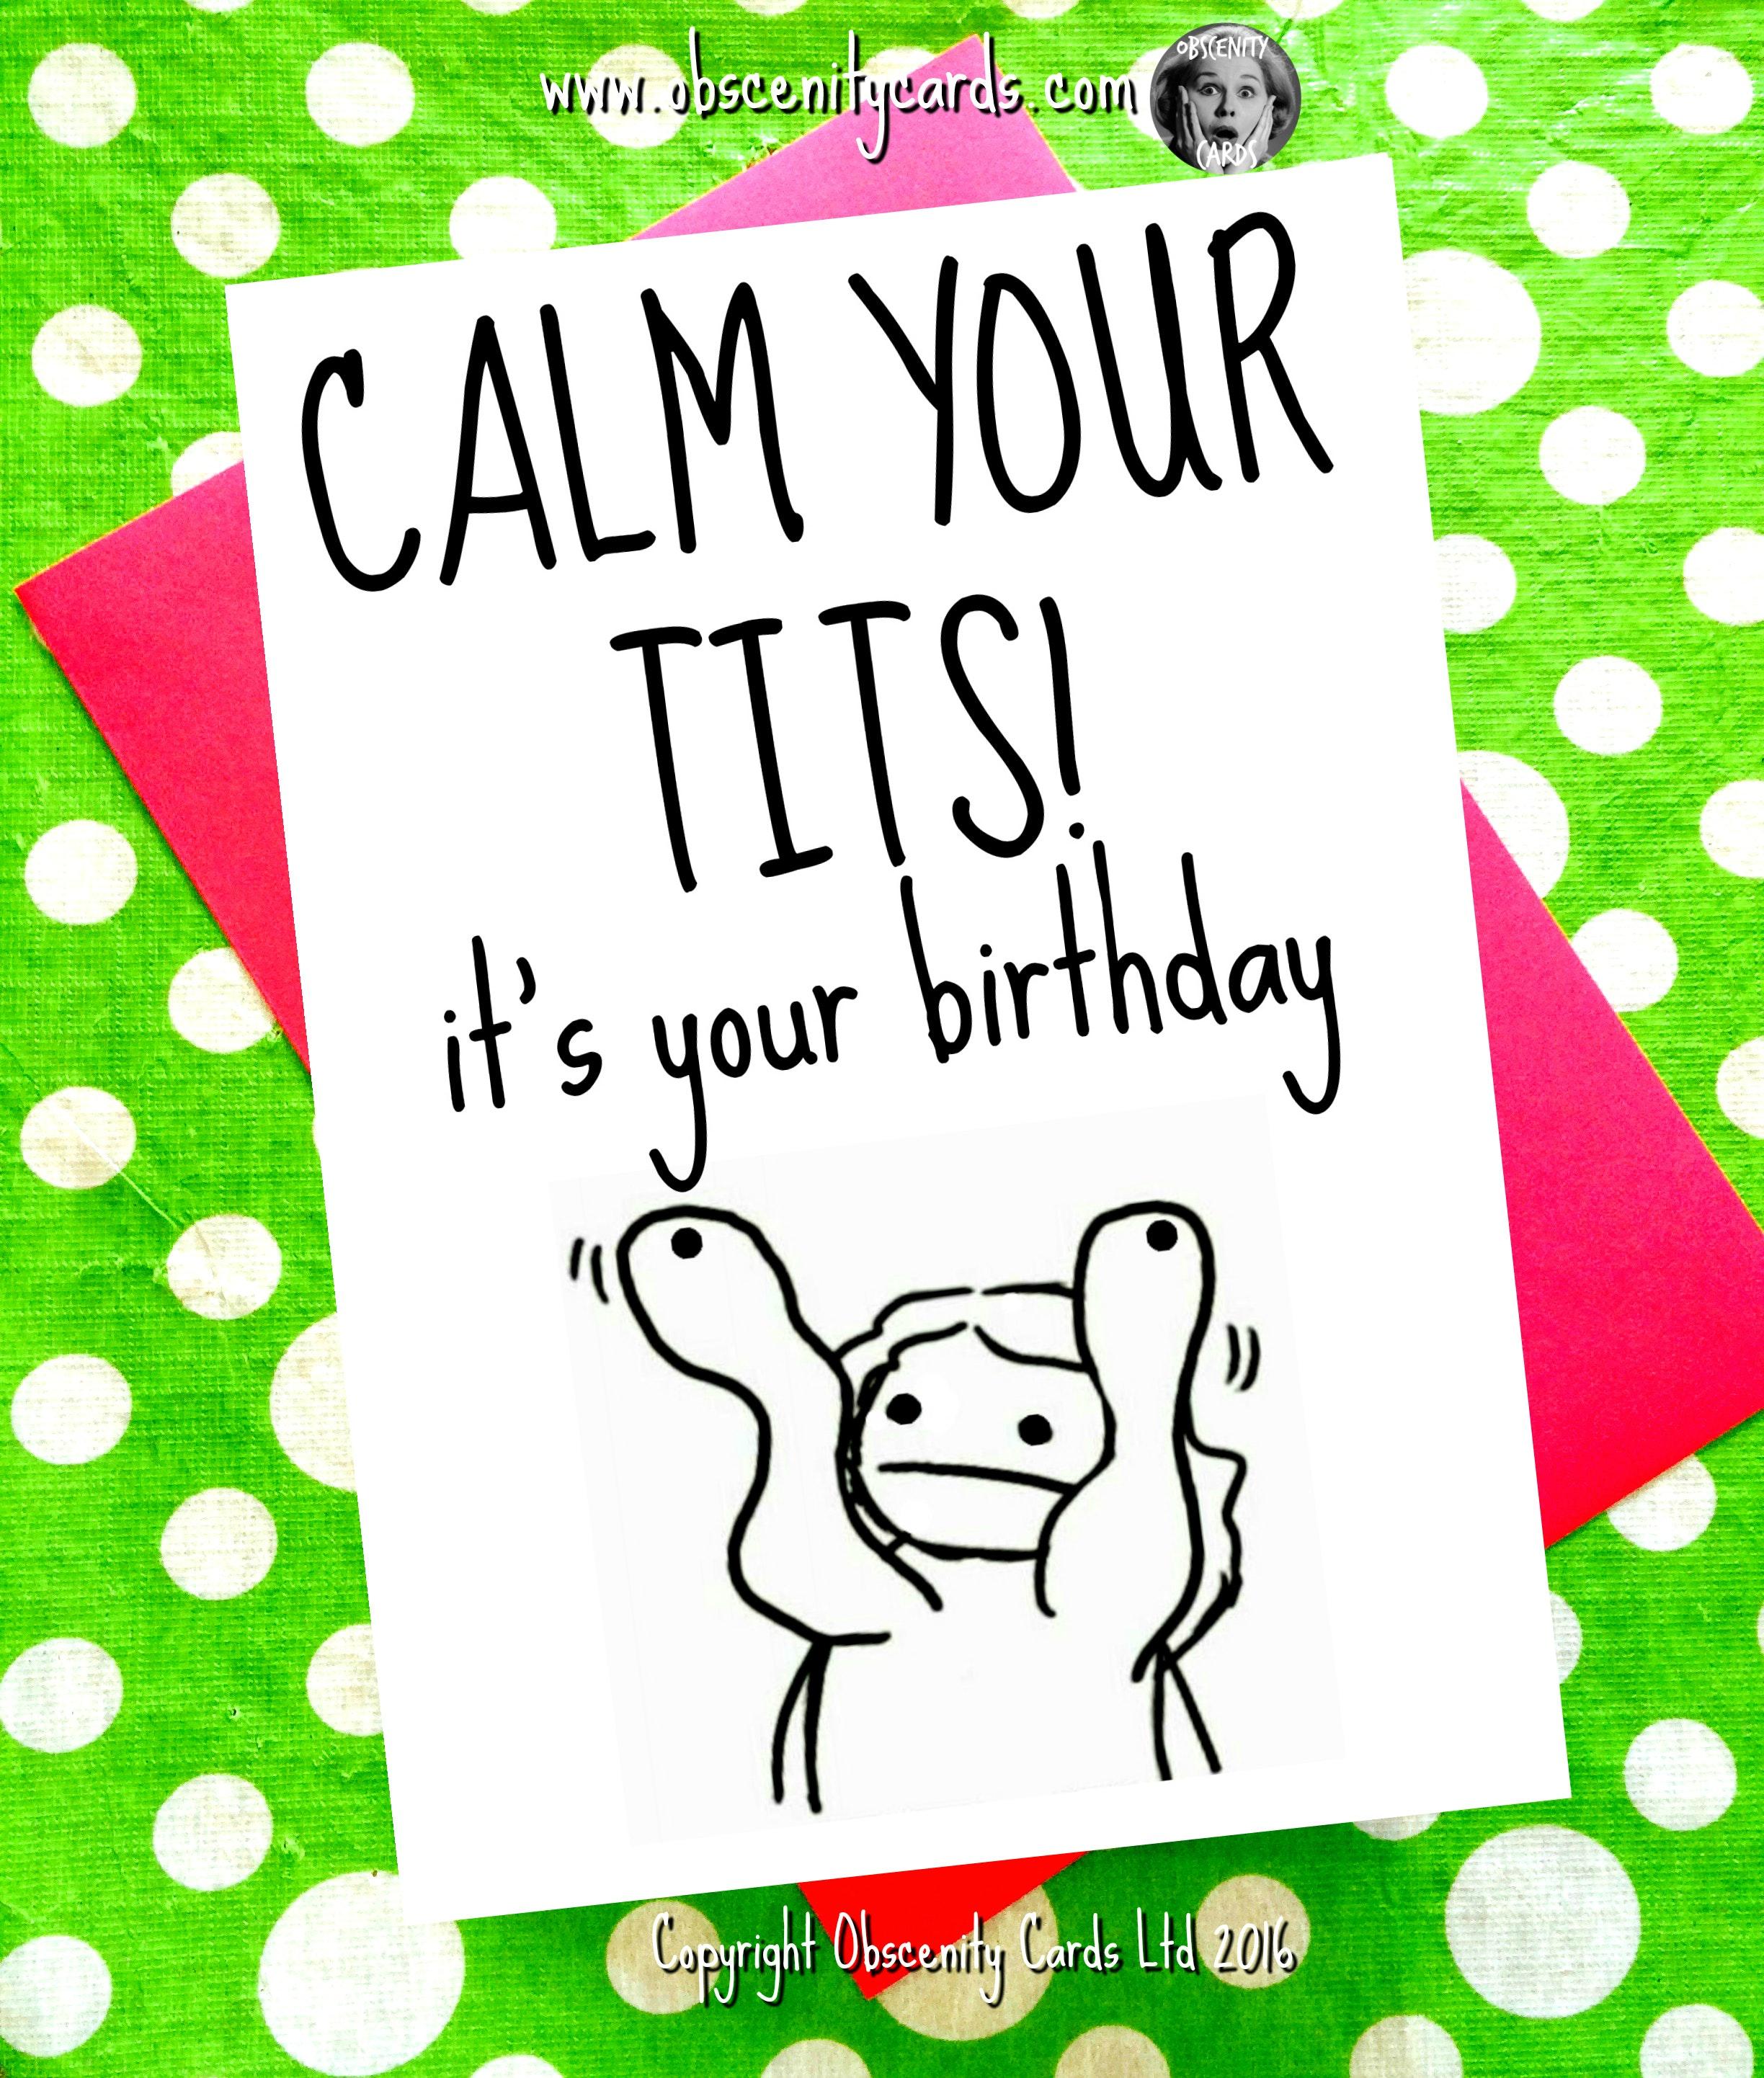 Funny Happy Birthday Card Calm Your Tits